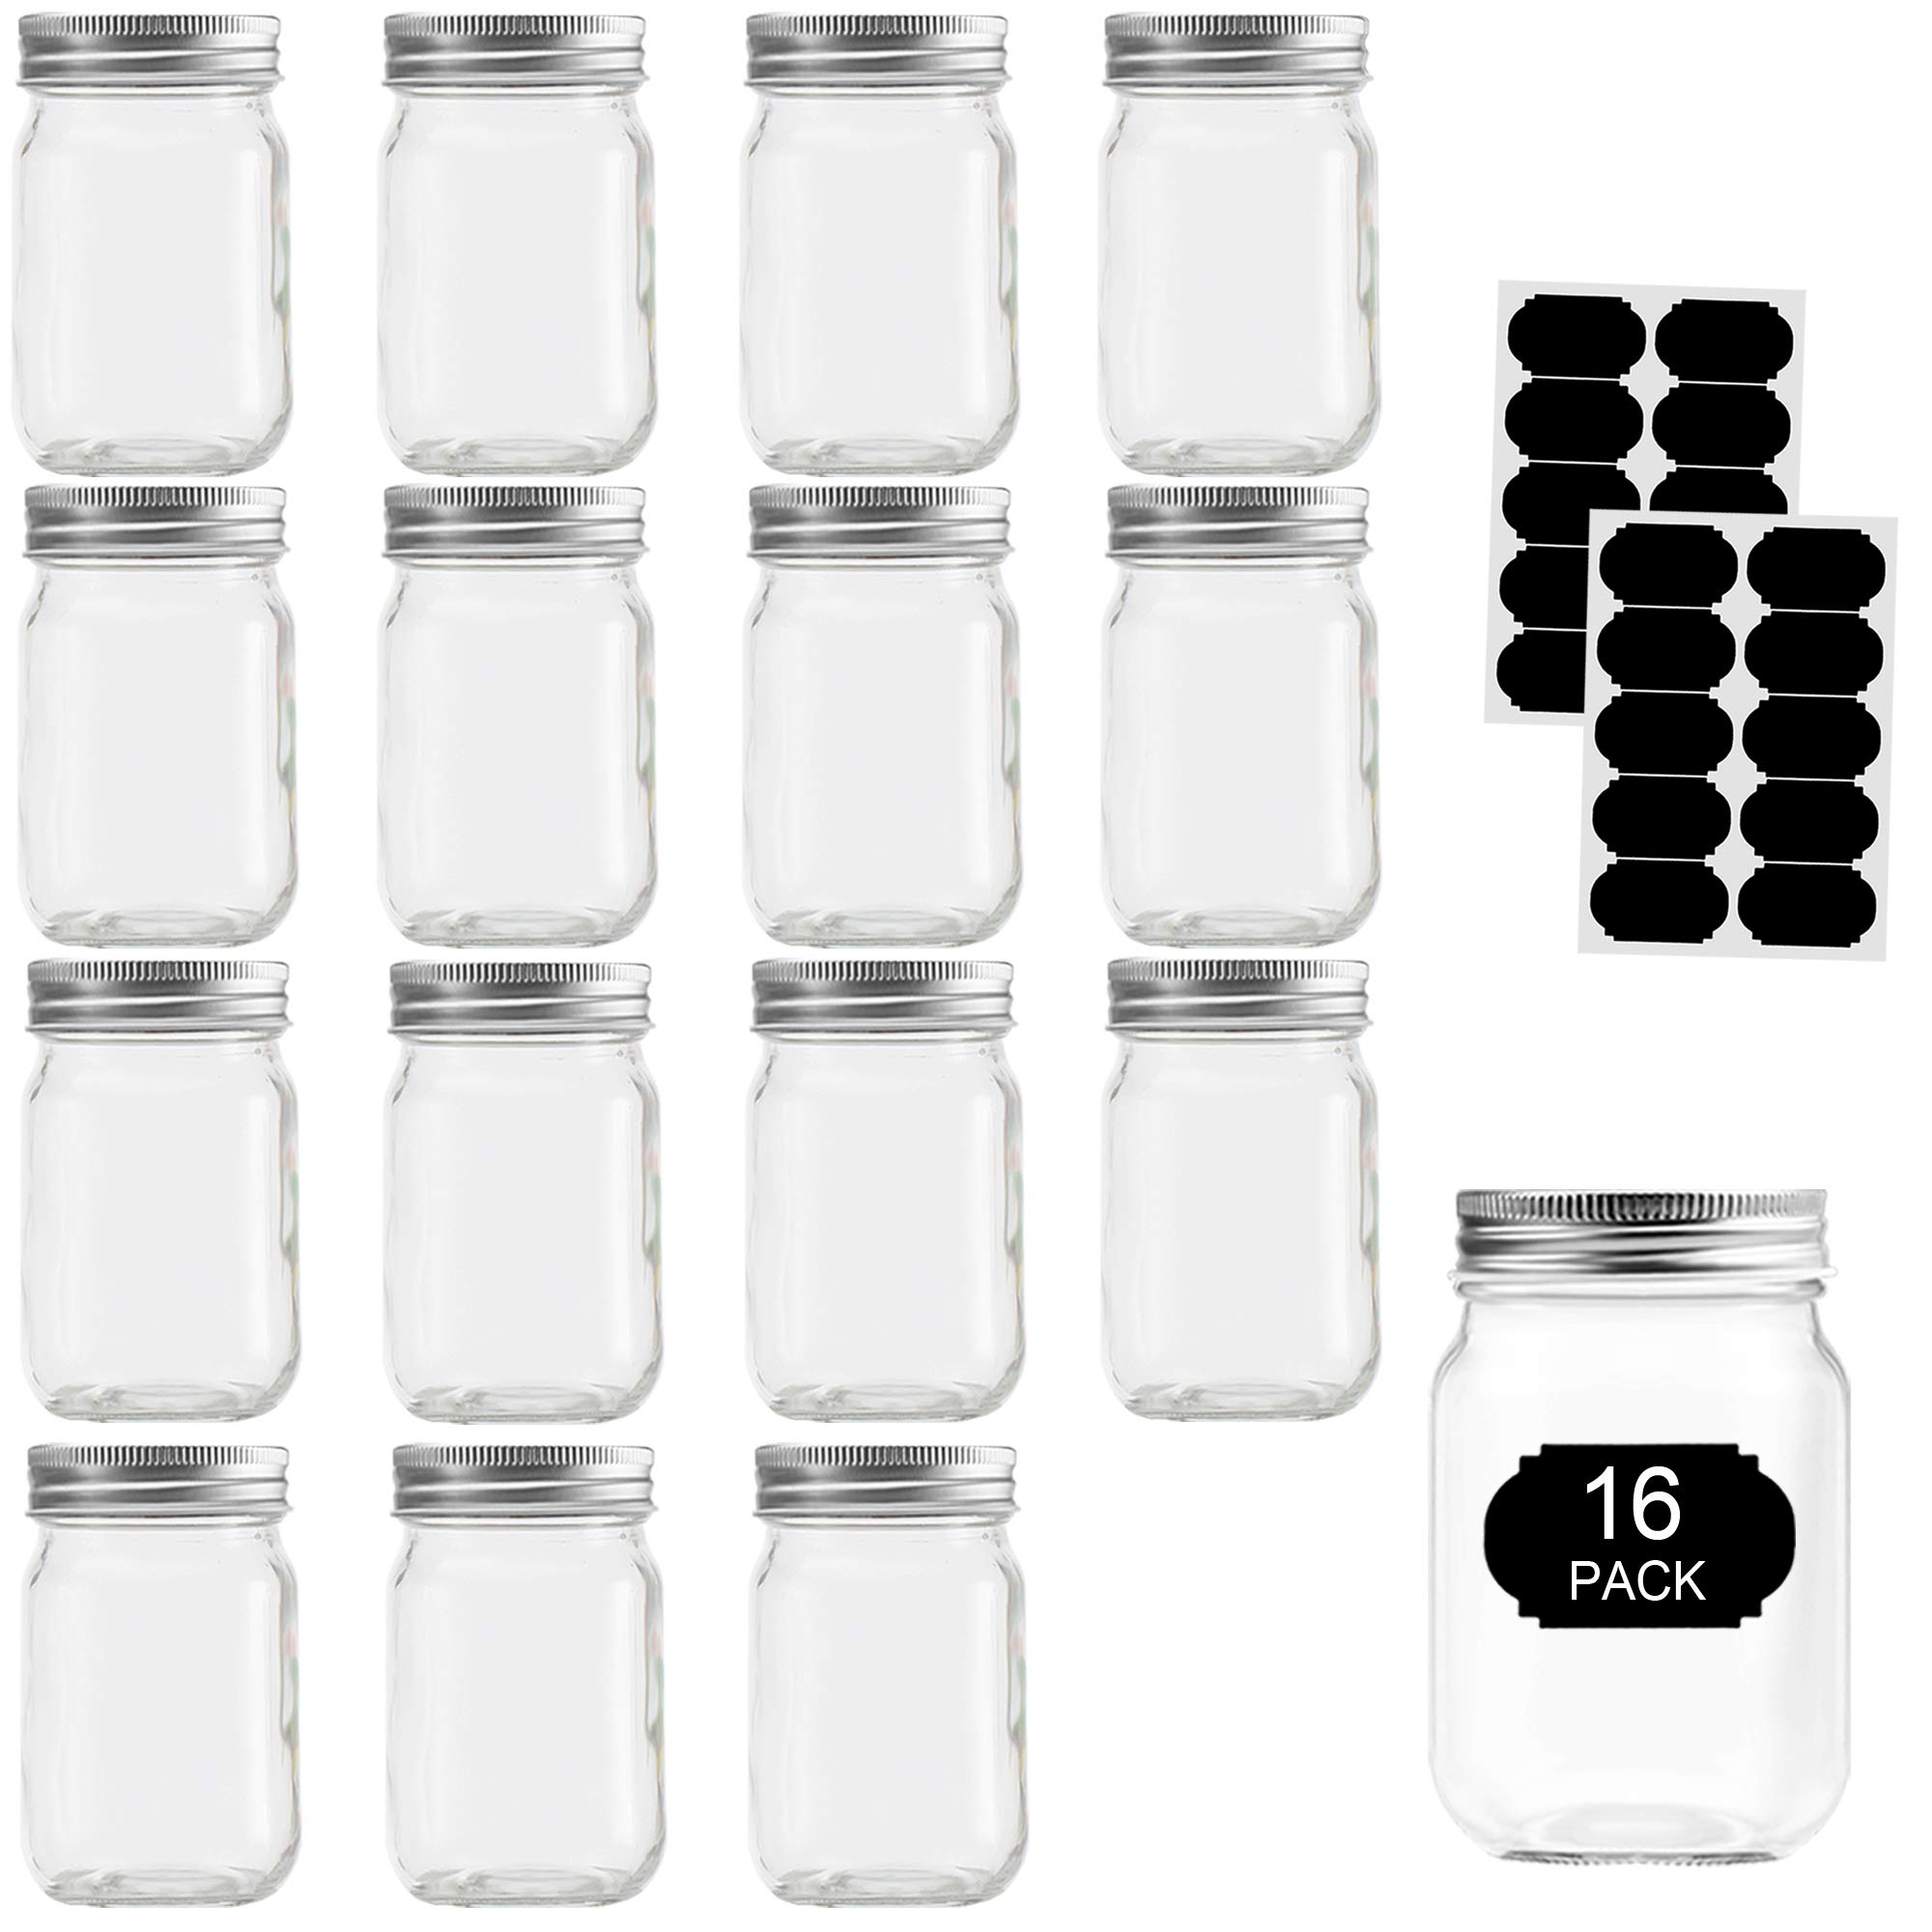 Glass Jars With Lids 12 oz, Mason Jars For Pickles And Kitchen Storage, Canning Jars Regular Mouth Spice Jars With Silver Lids For Drinking, Overni...